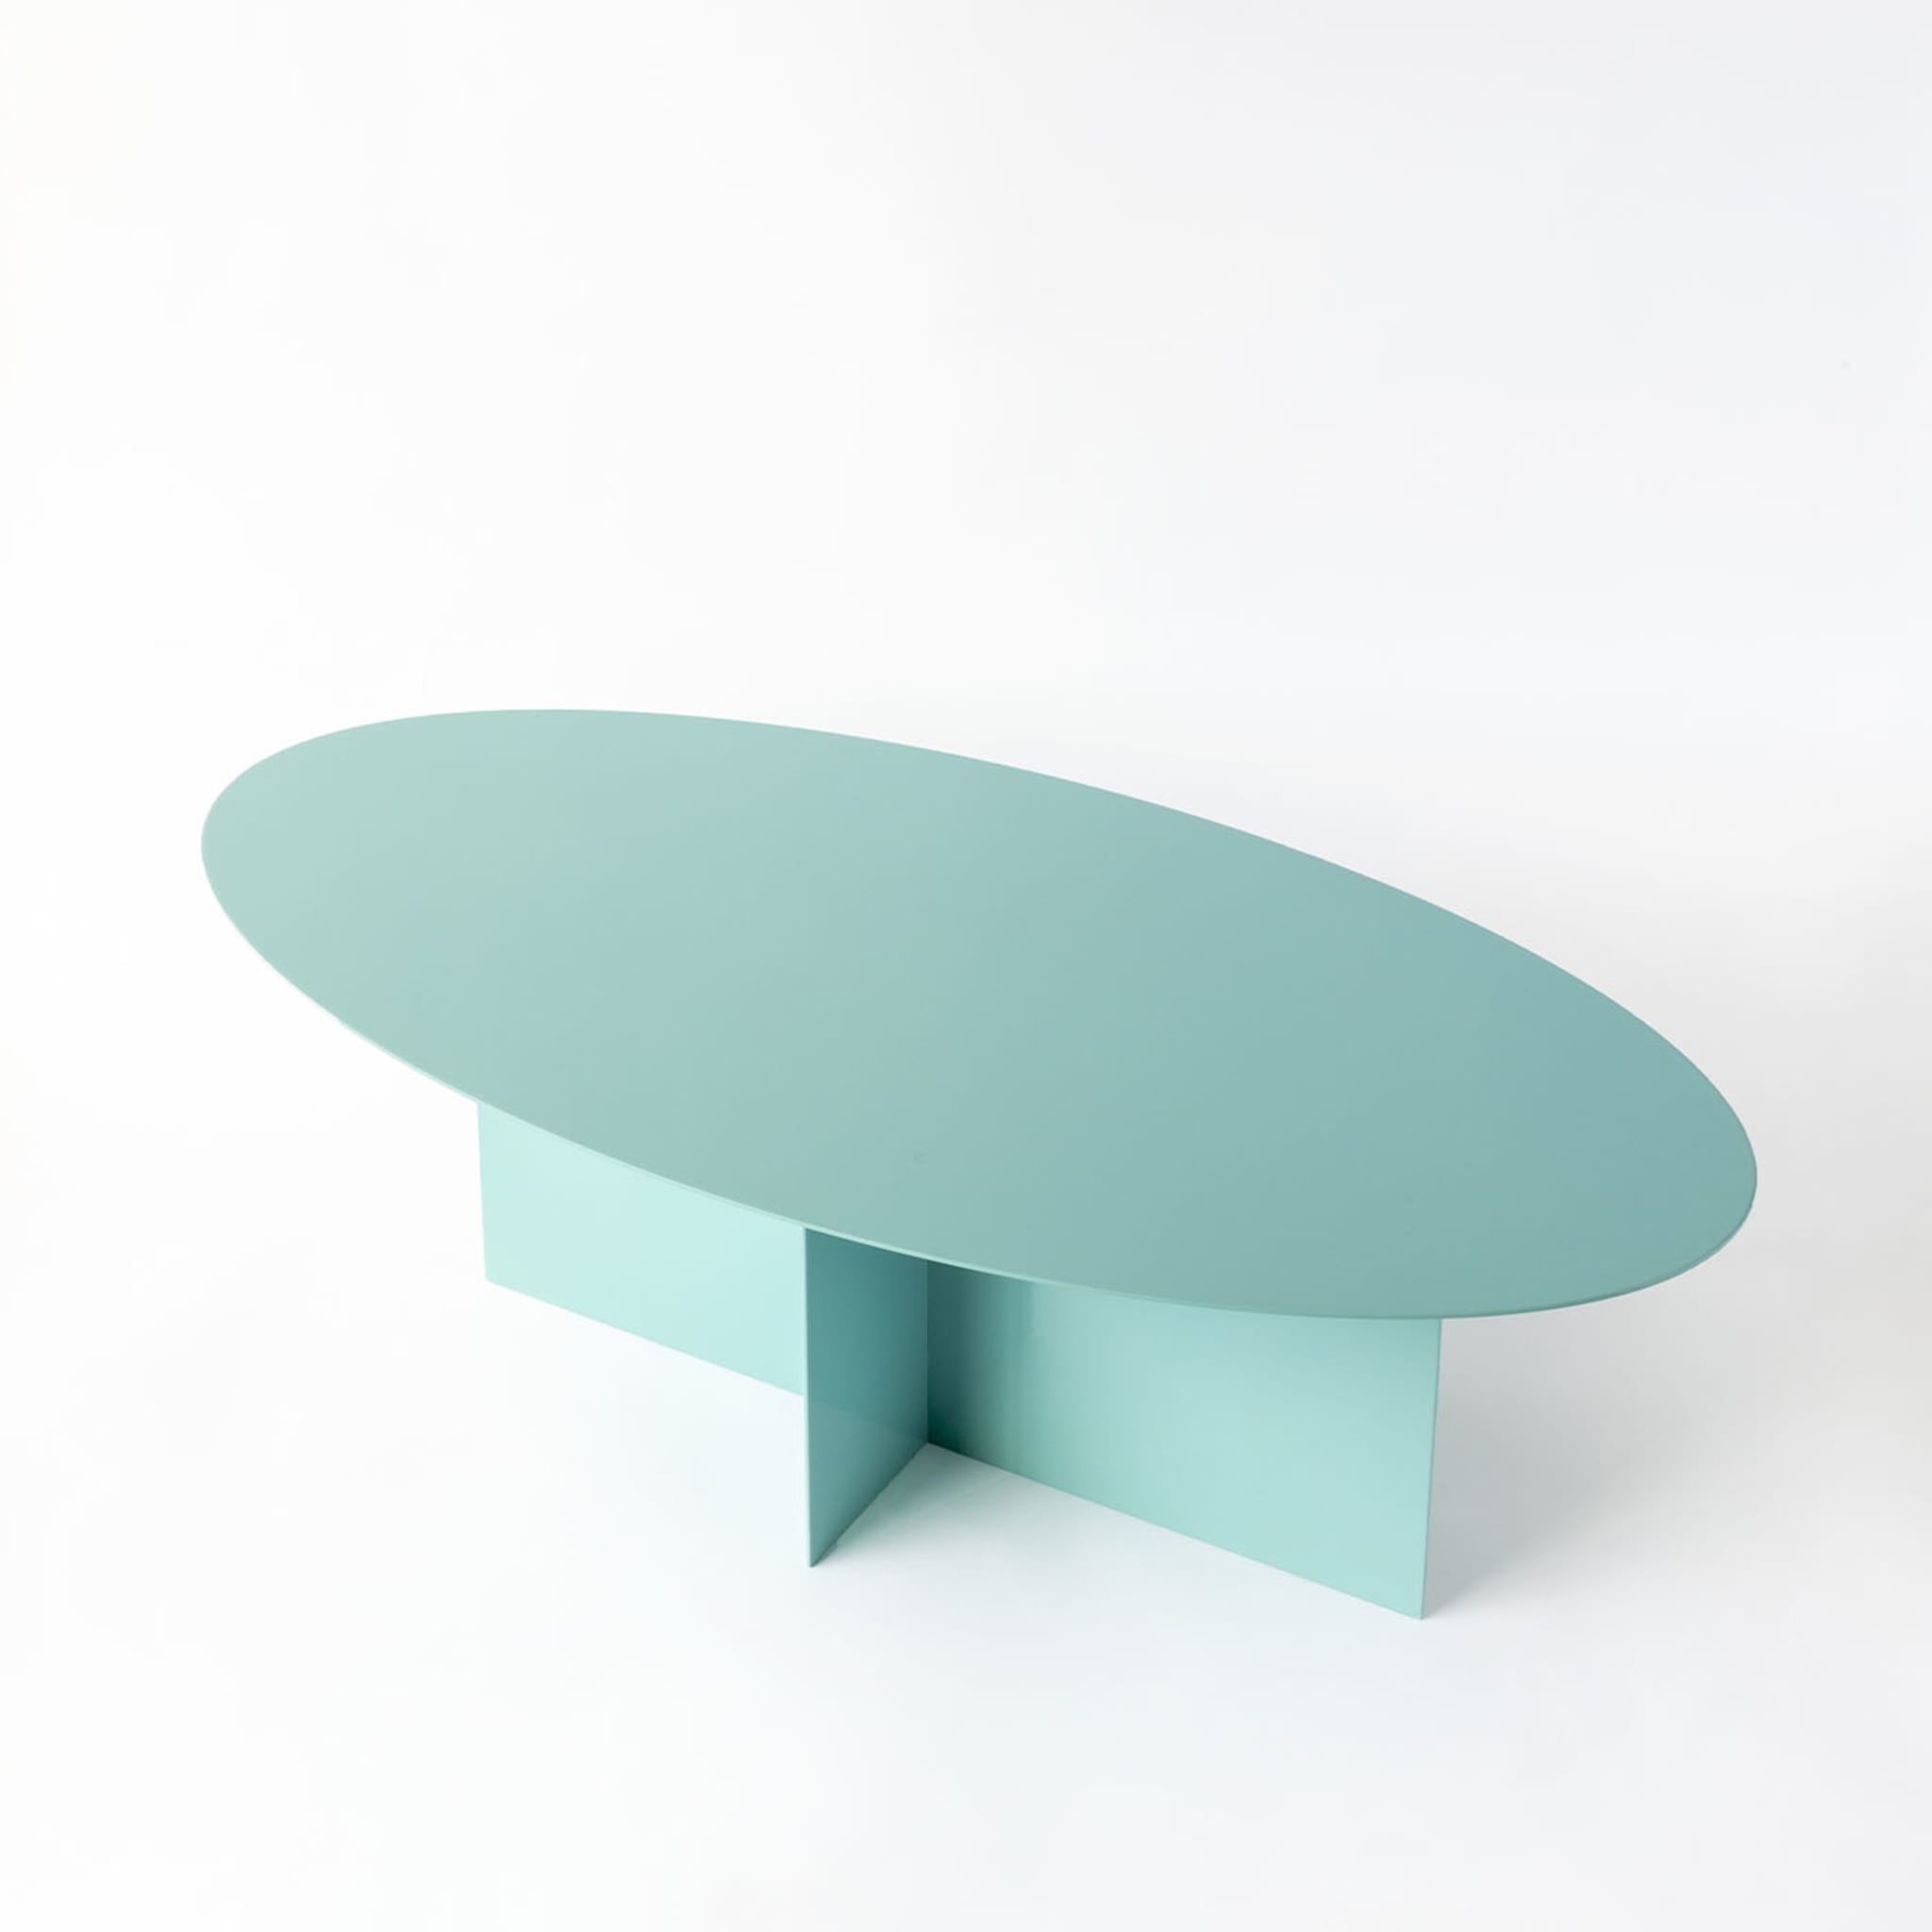 Across Oval Coffe Table Elliptical by Claudia Pignatale - Alternative view 2